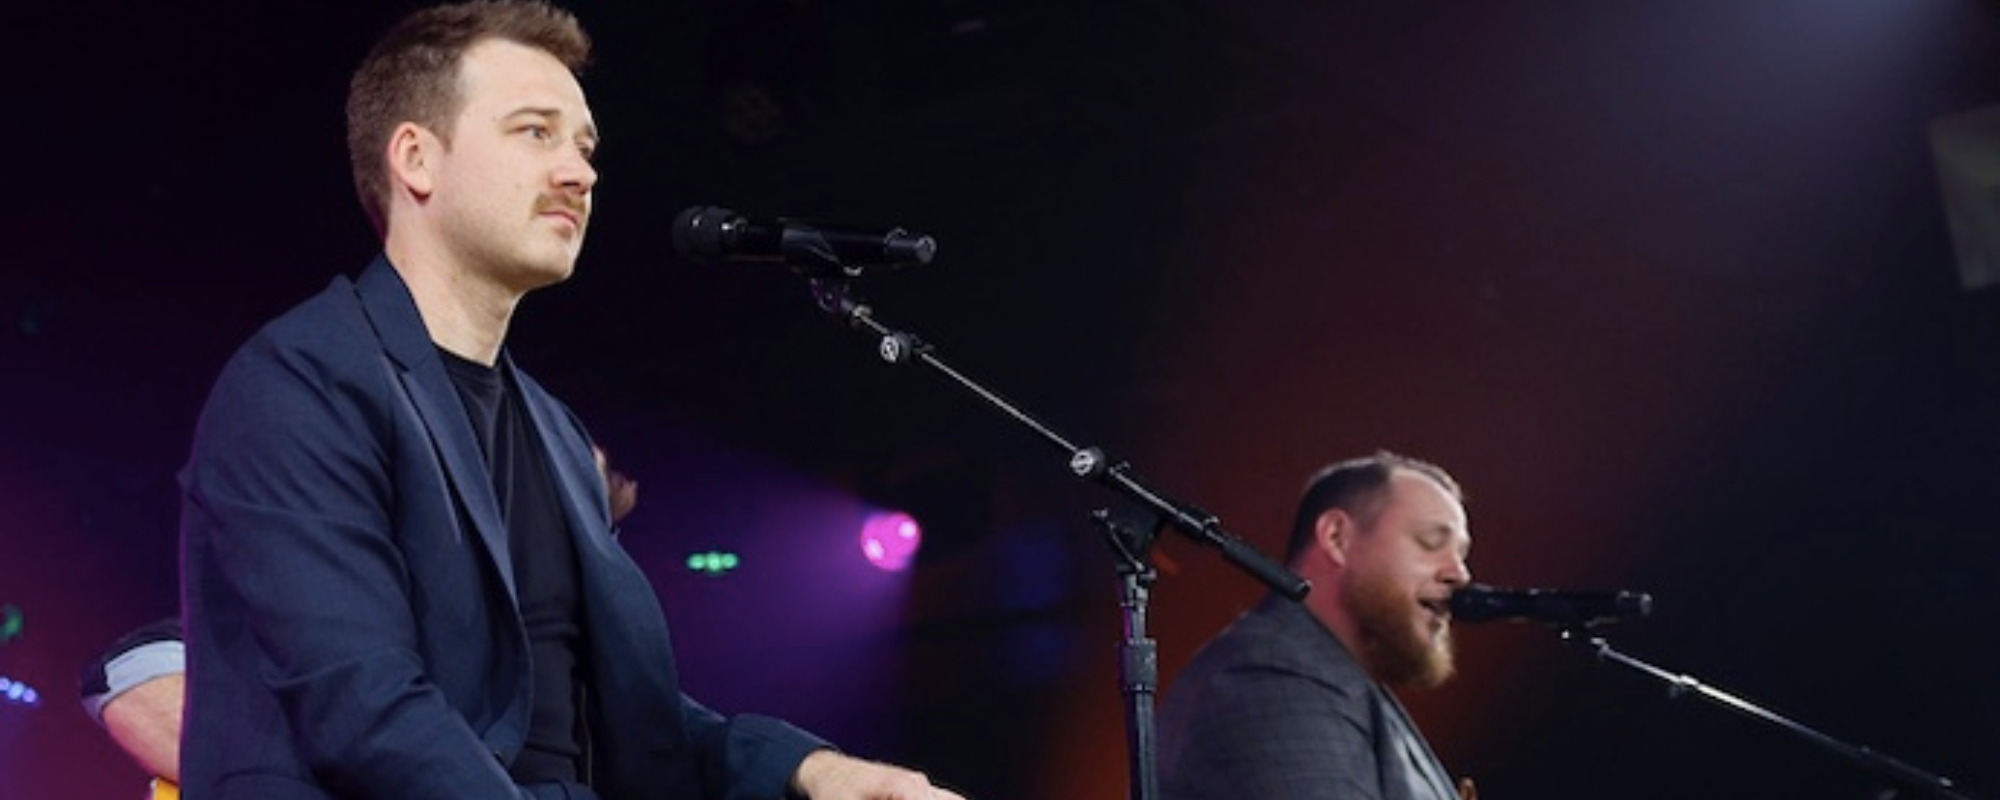 Watch: Luke Combs Performs Morgan Wallen’s “Thought You Should Know” at the BMI Country Awards